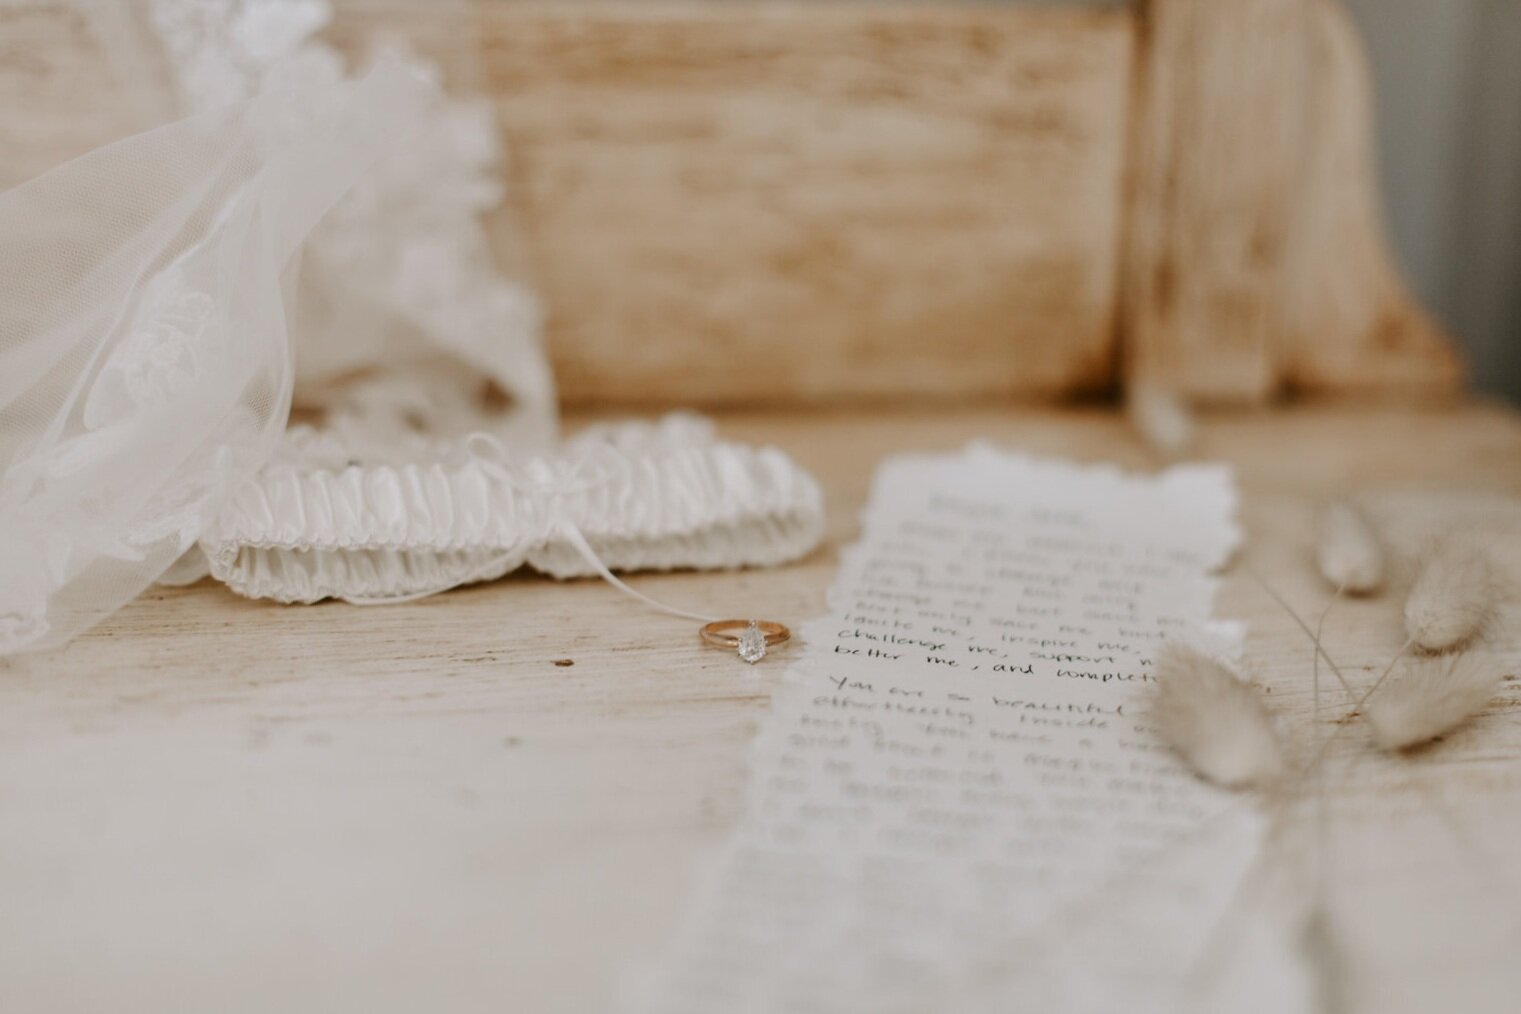 handwritten letter on deckled edge recycled paper and bridal details on an antique dress at Estes Park AirBnB Elopement for an LGBTQ couple with Colorado elopement photographer Diana Coulter